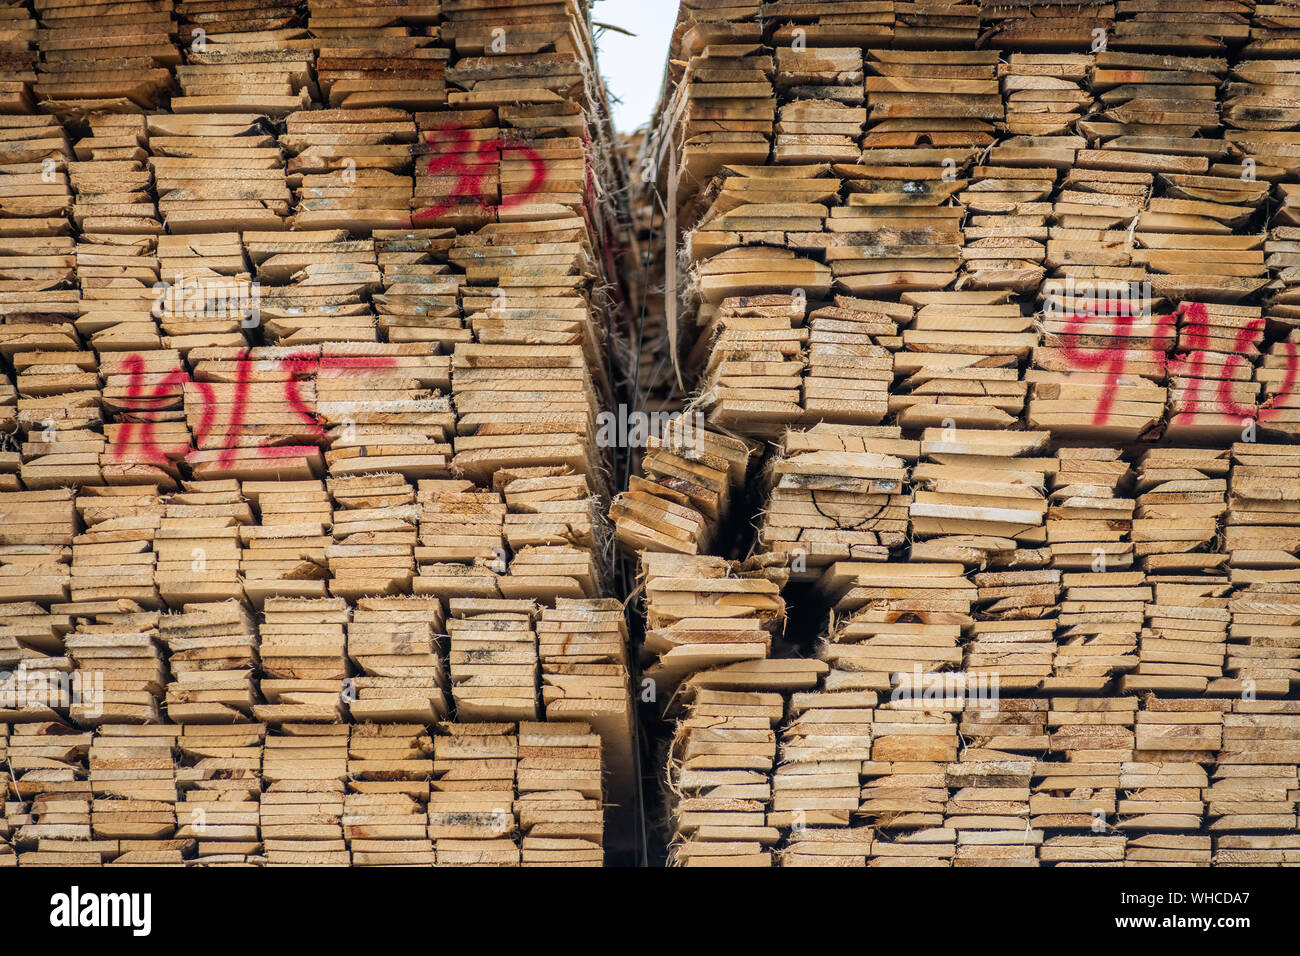 Abstract pile of lumber Stock Photo